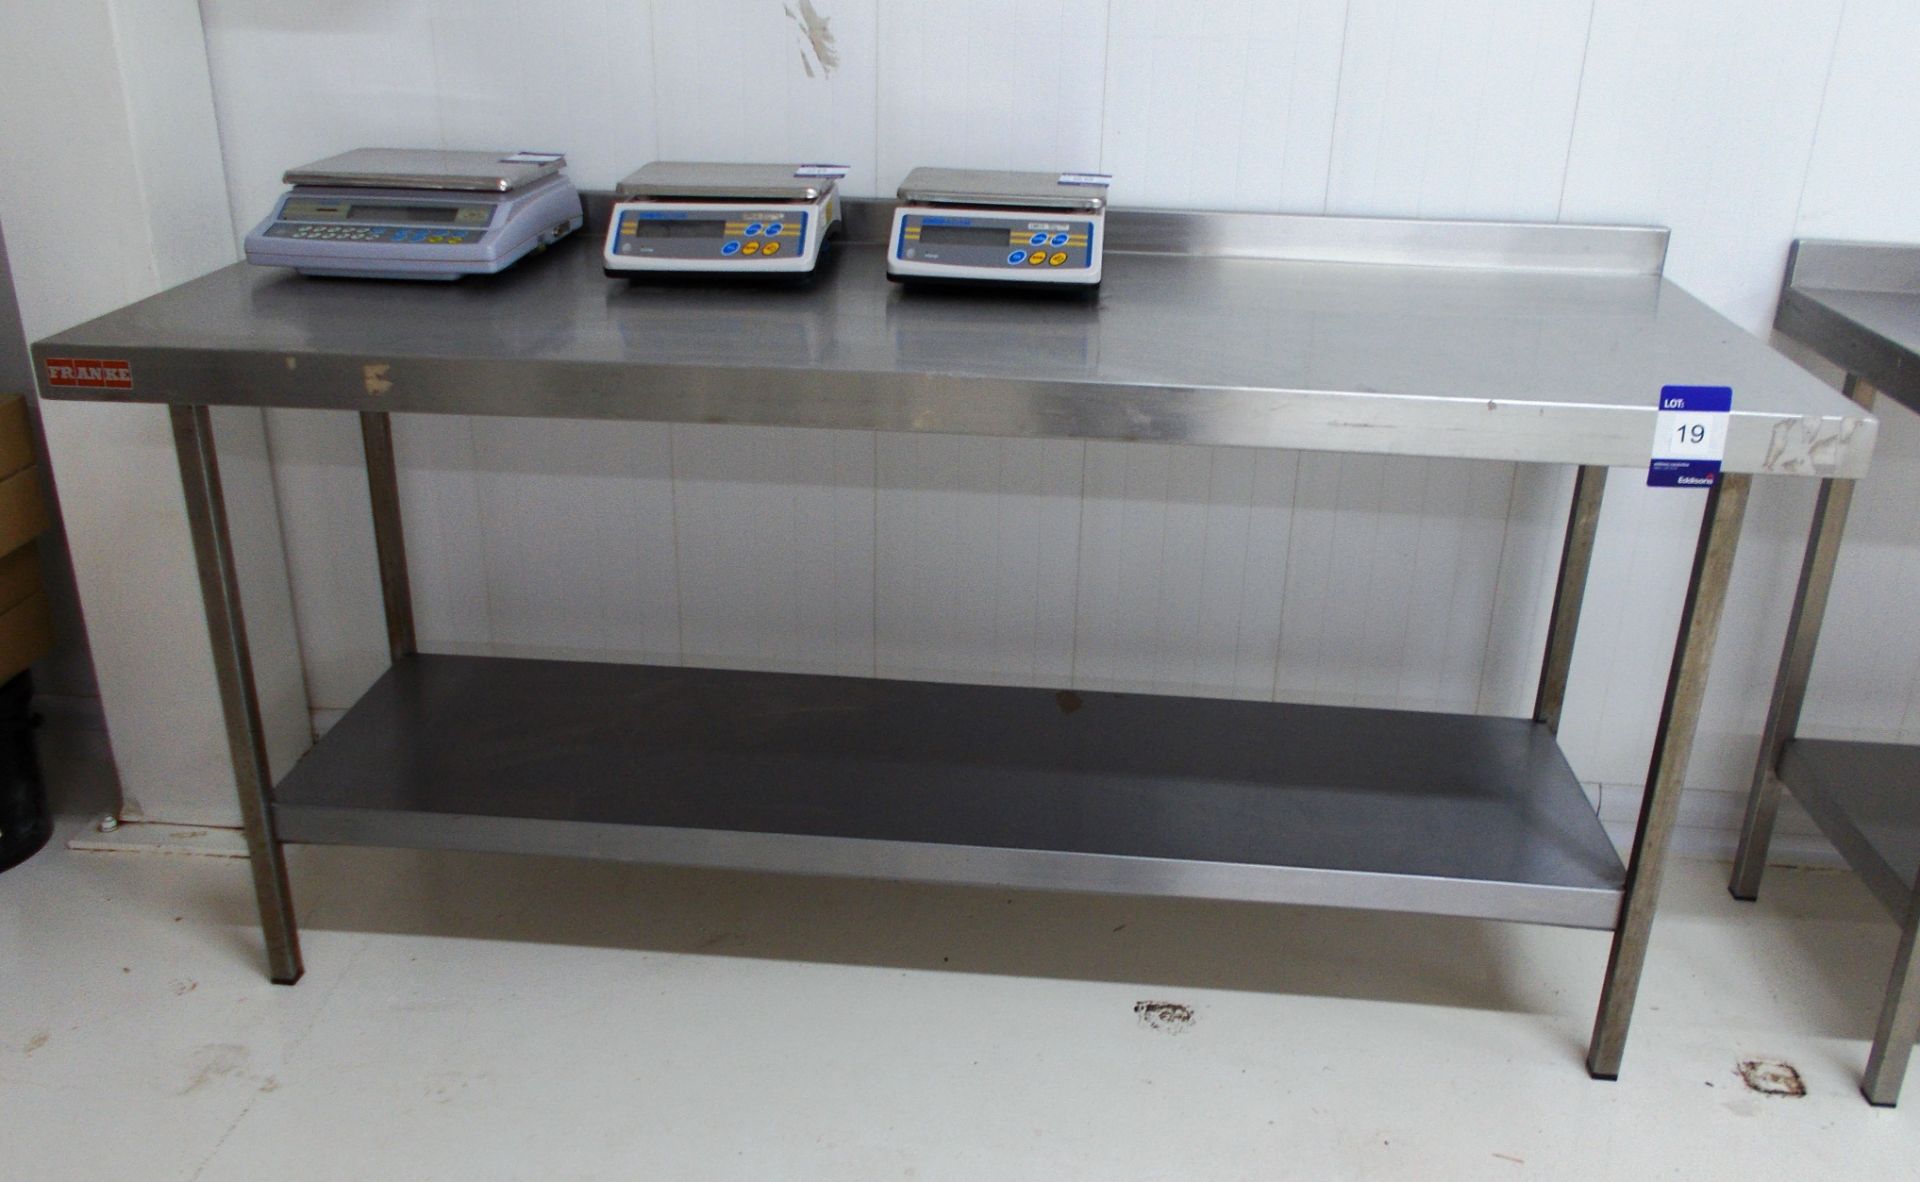 Franke stainless steel table approx. 6ft x 4